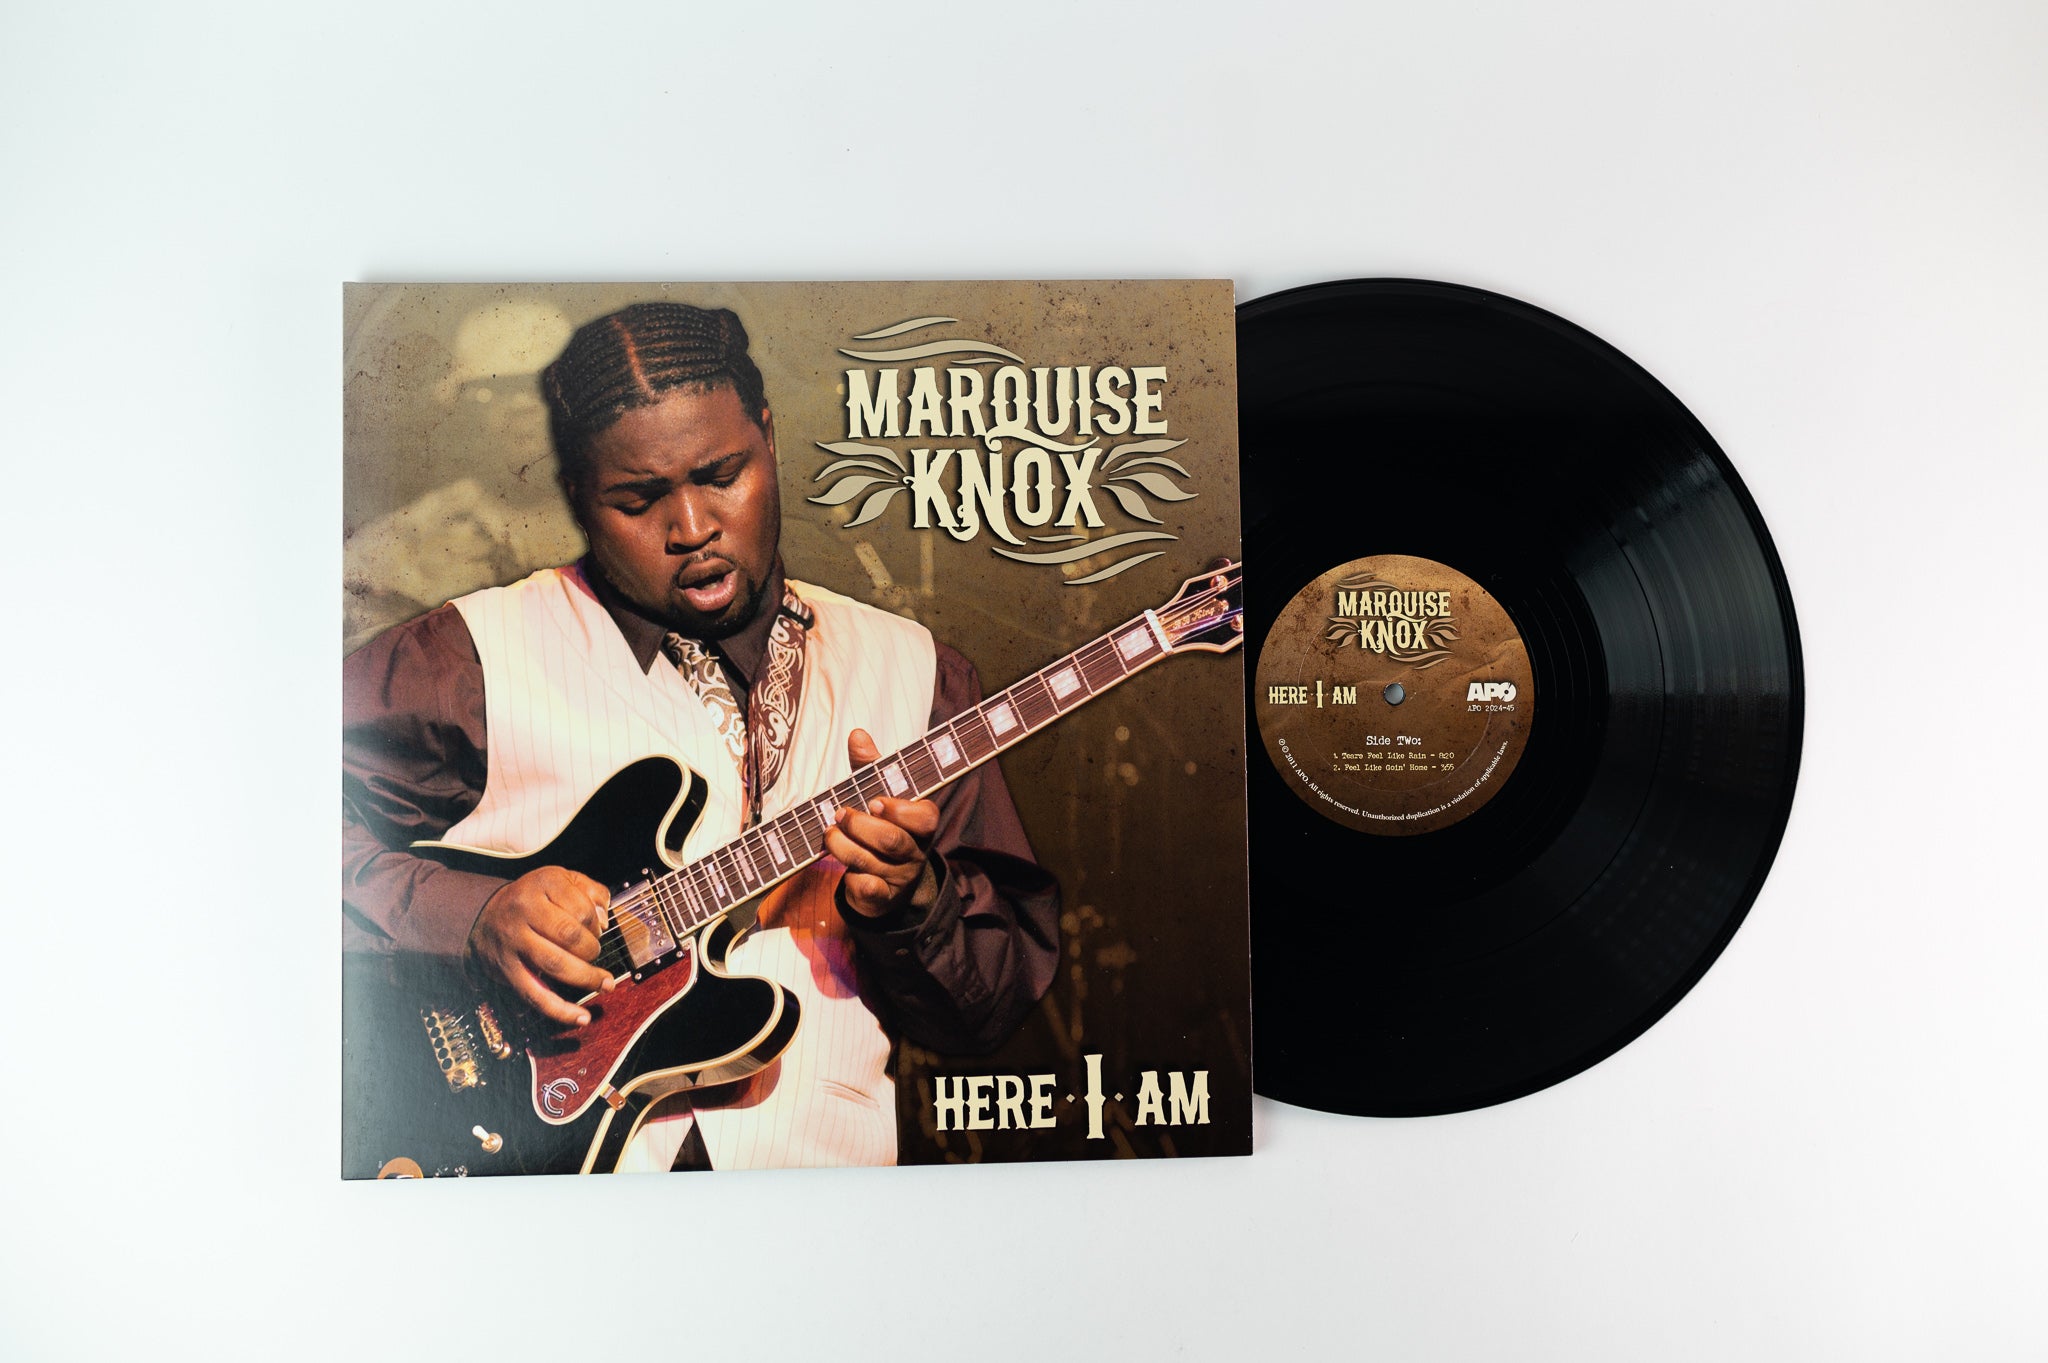 Marquise Knox - Here I Am on APO 200 Gram